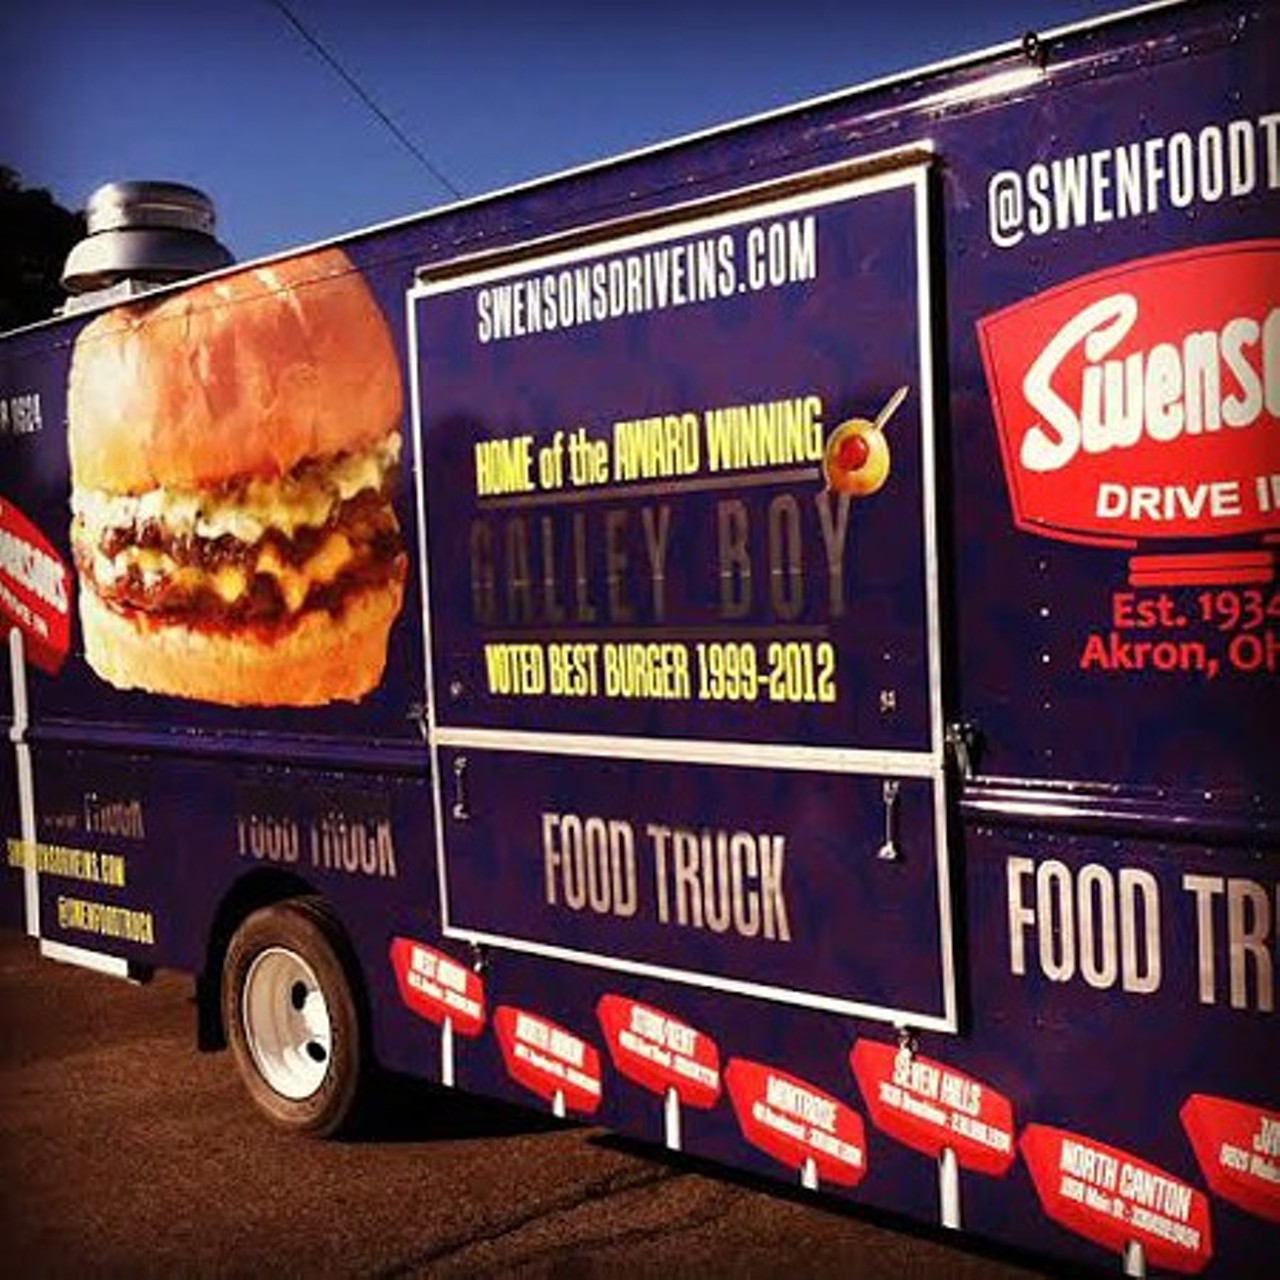 Swenson's - Get your burger fix from the legendary buger mobile. Check out Swenson's Twitter page for current truck locations.